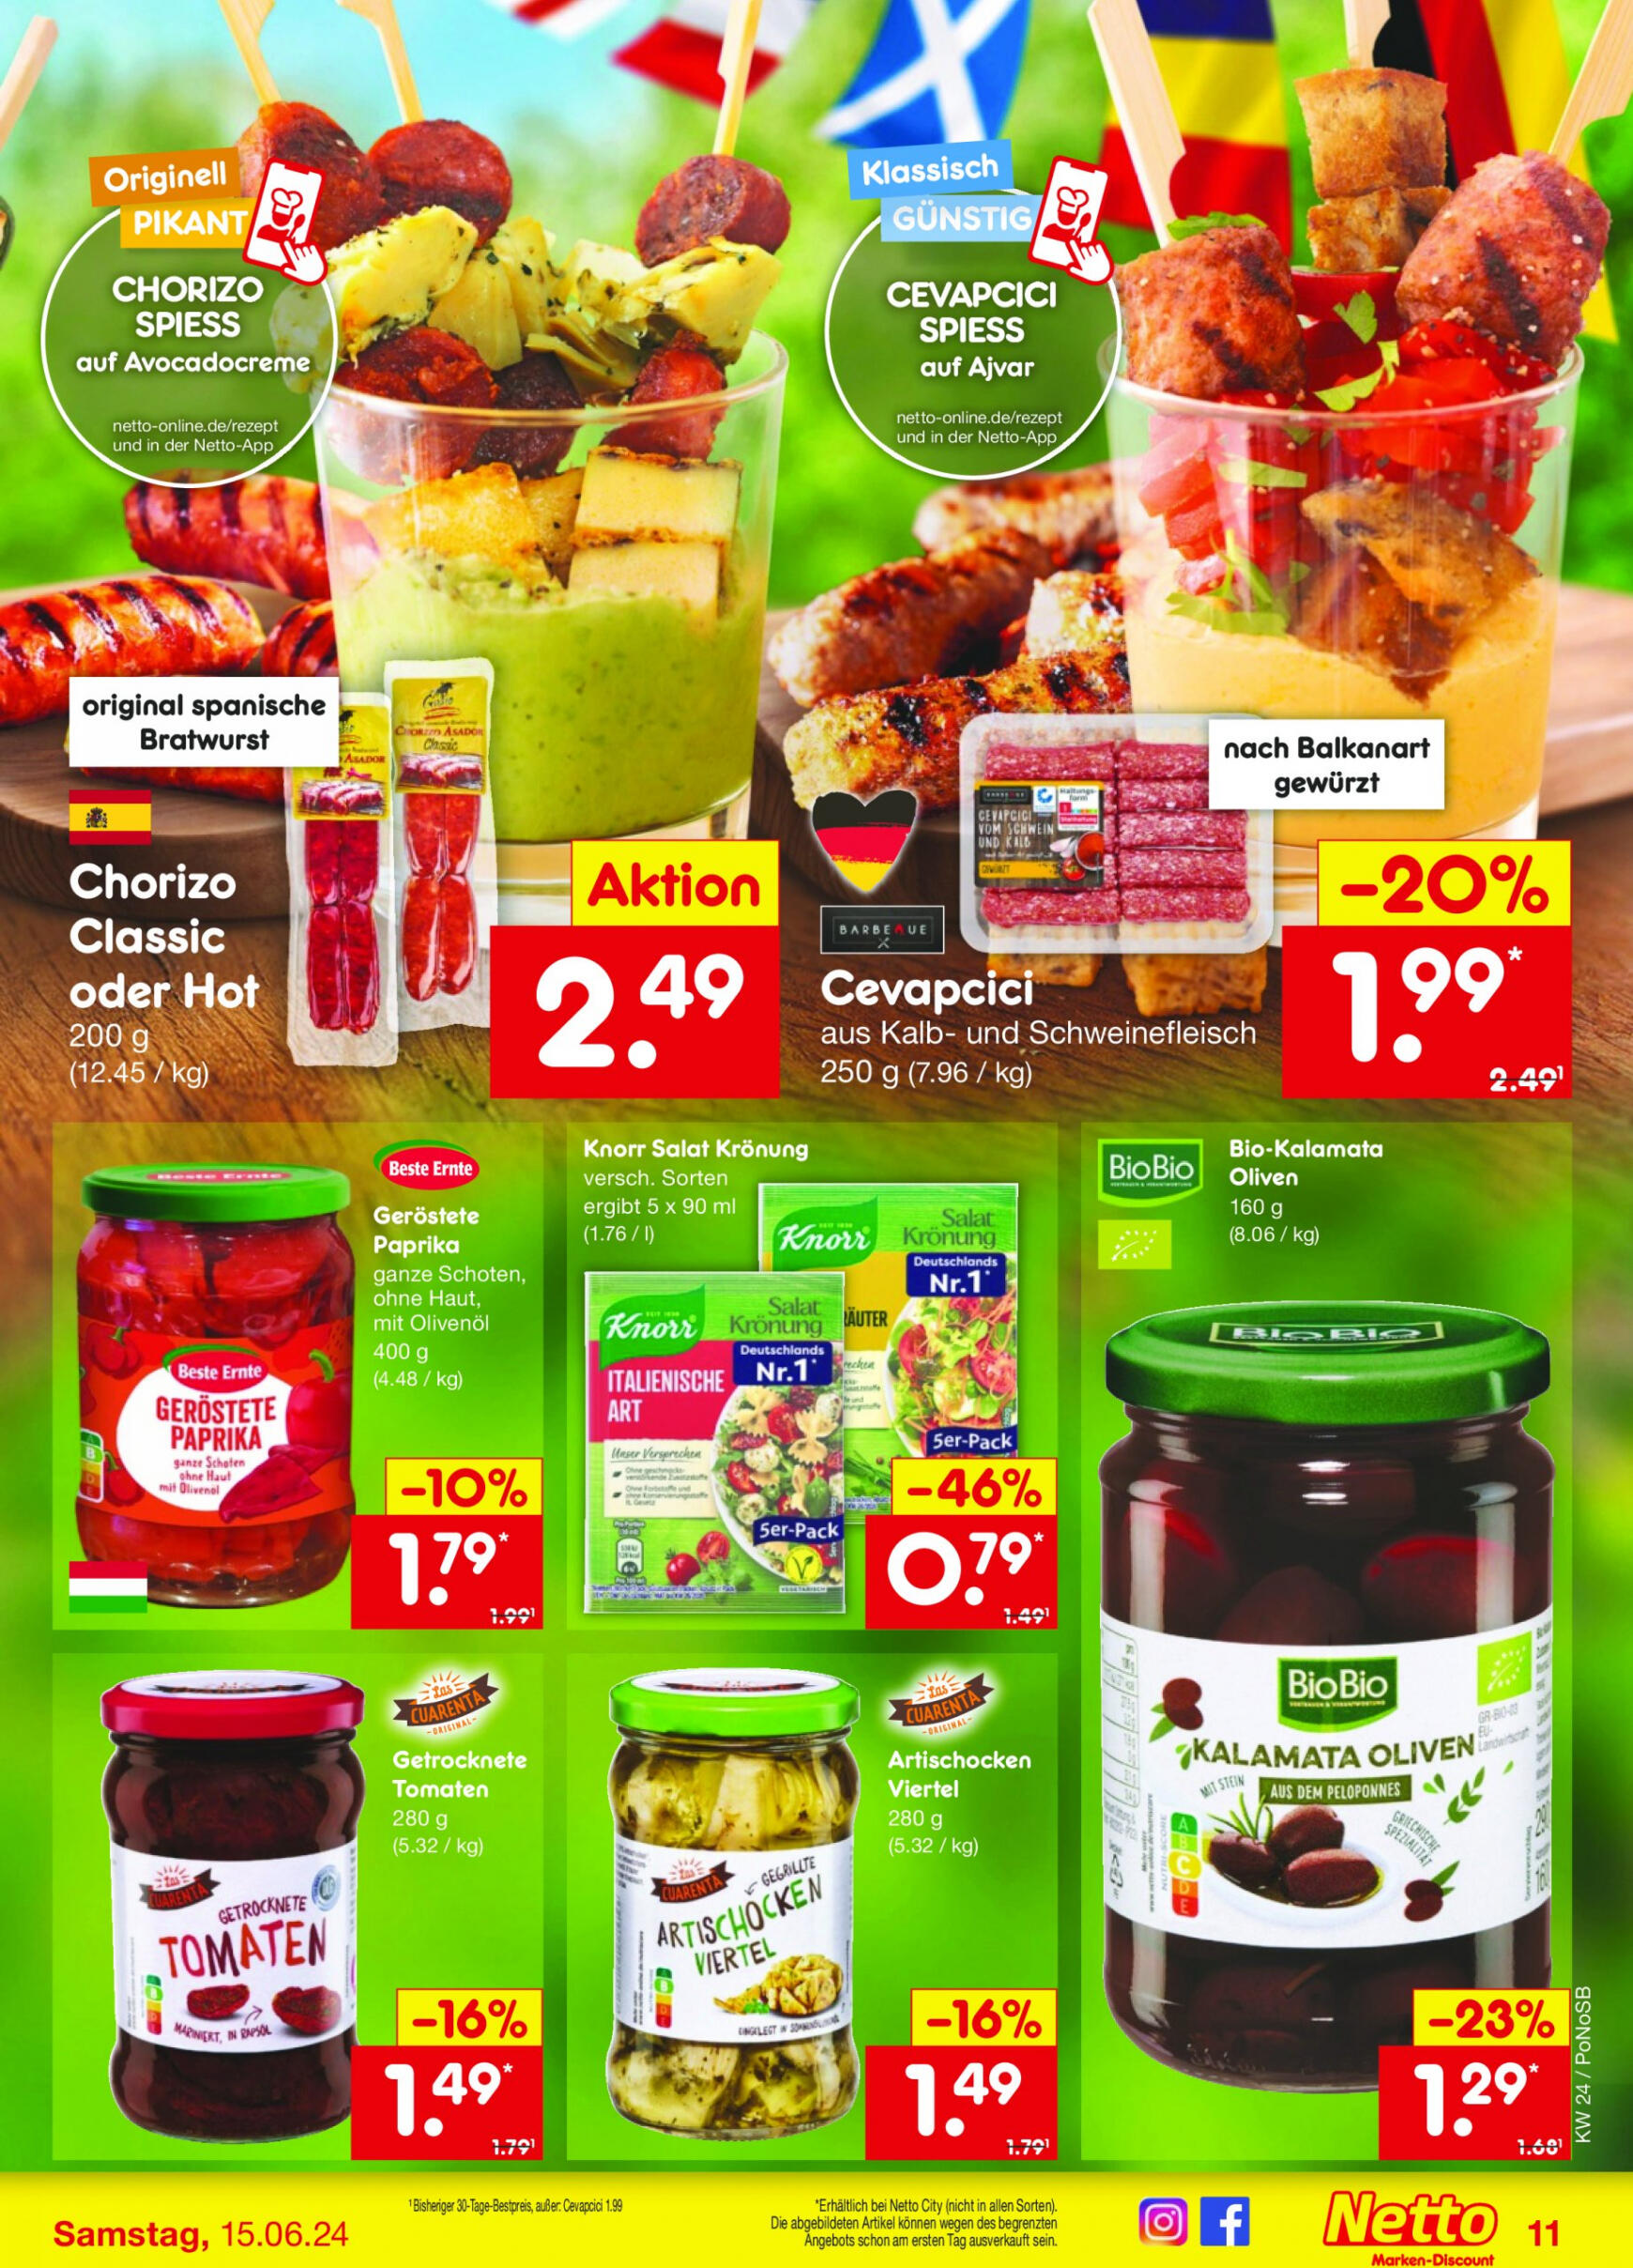 netto - Flyer Netto aktuell 10.06. - 15.06. - page: 13